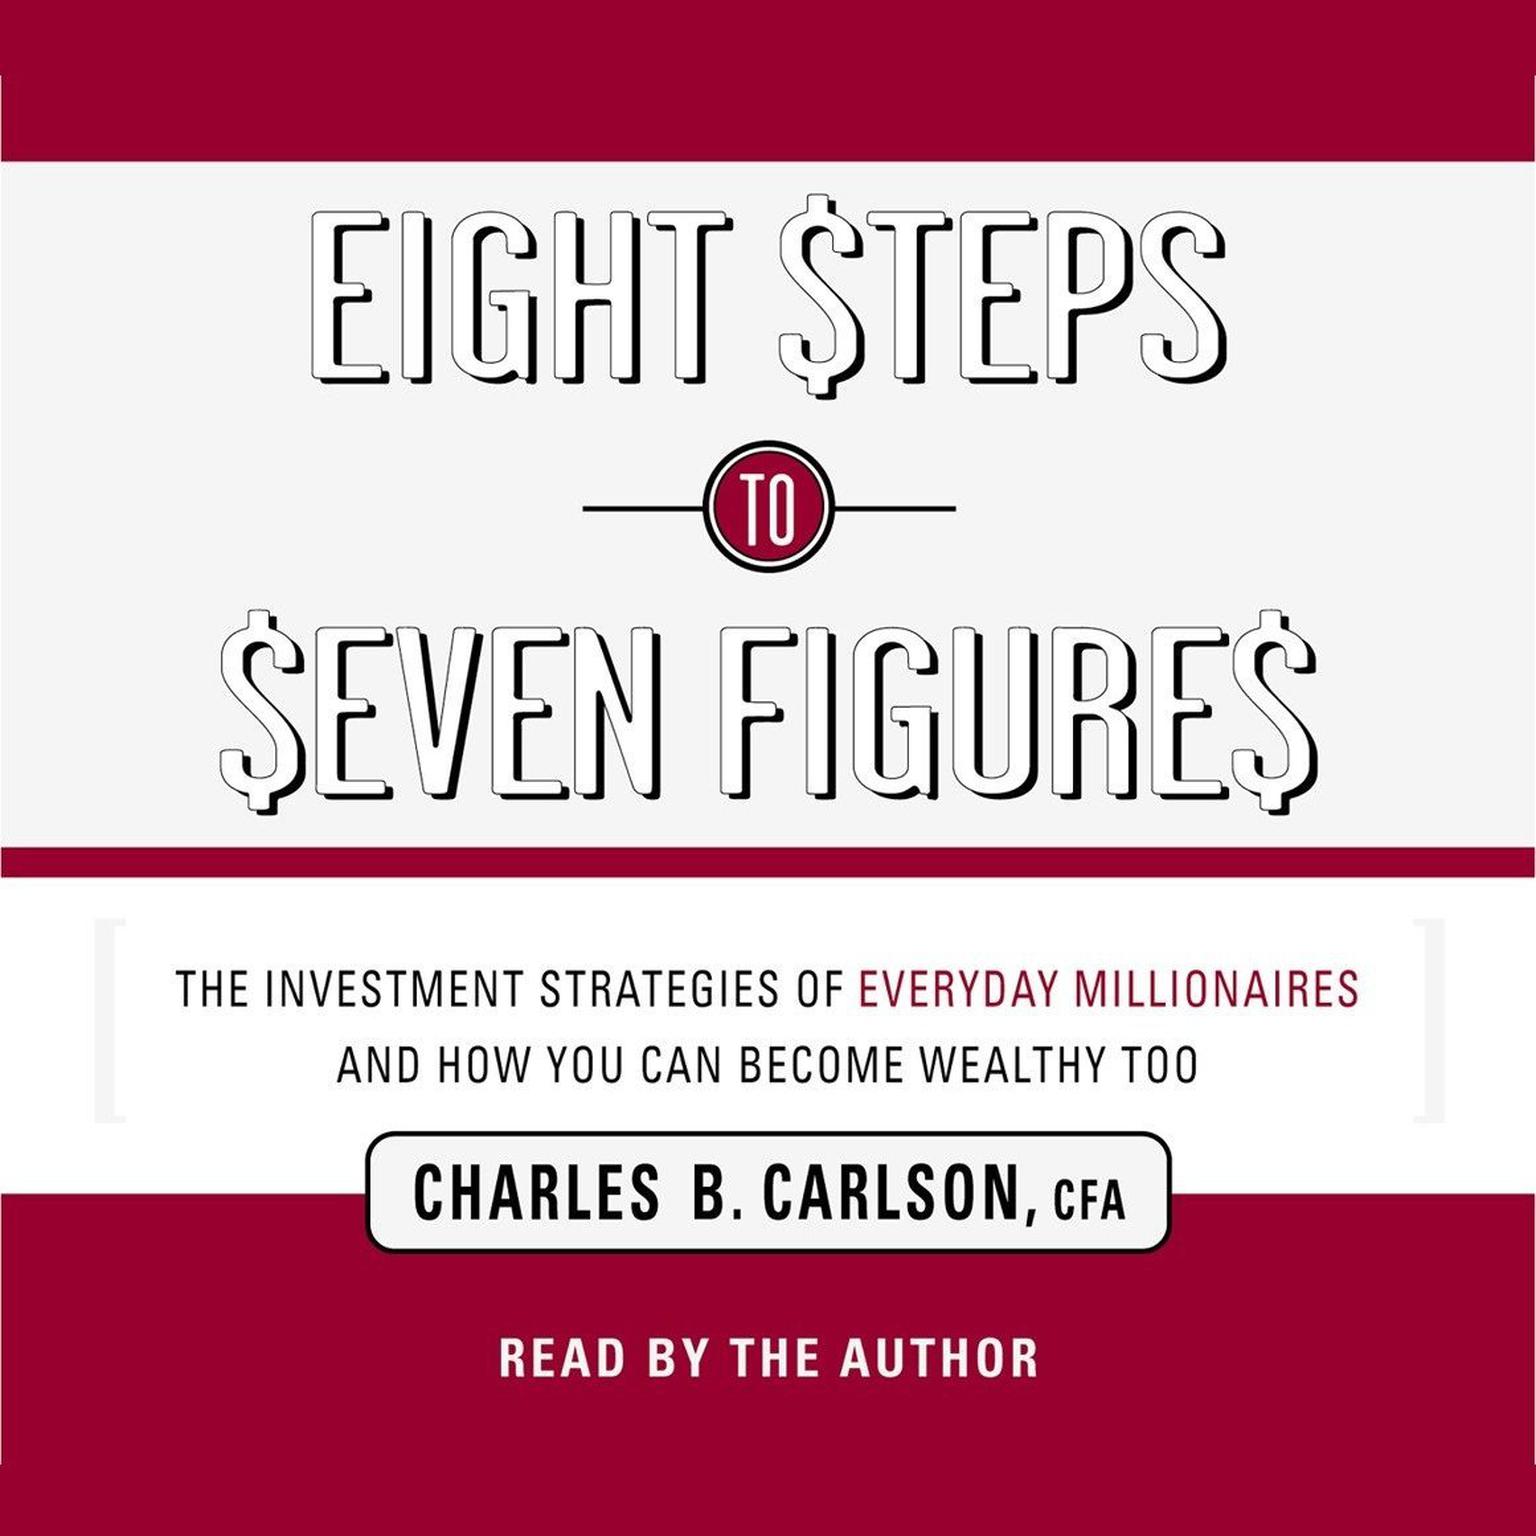 Eight Steps to Seven Figures (Abridged): The Investment Strategies of Everyday Millionaires and How You Can Become Wealthy Too Audiobook, by Charles B. Carlson